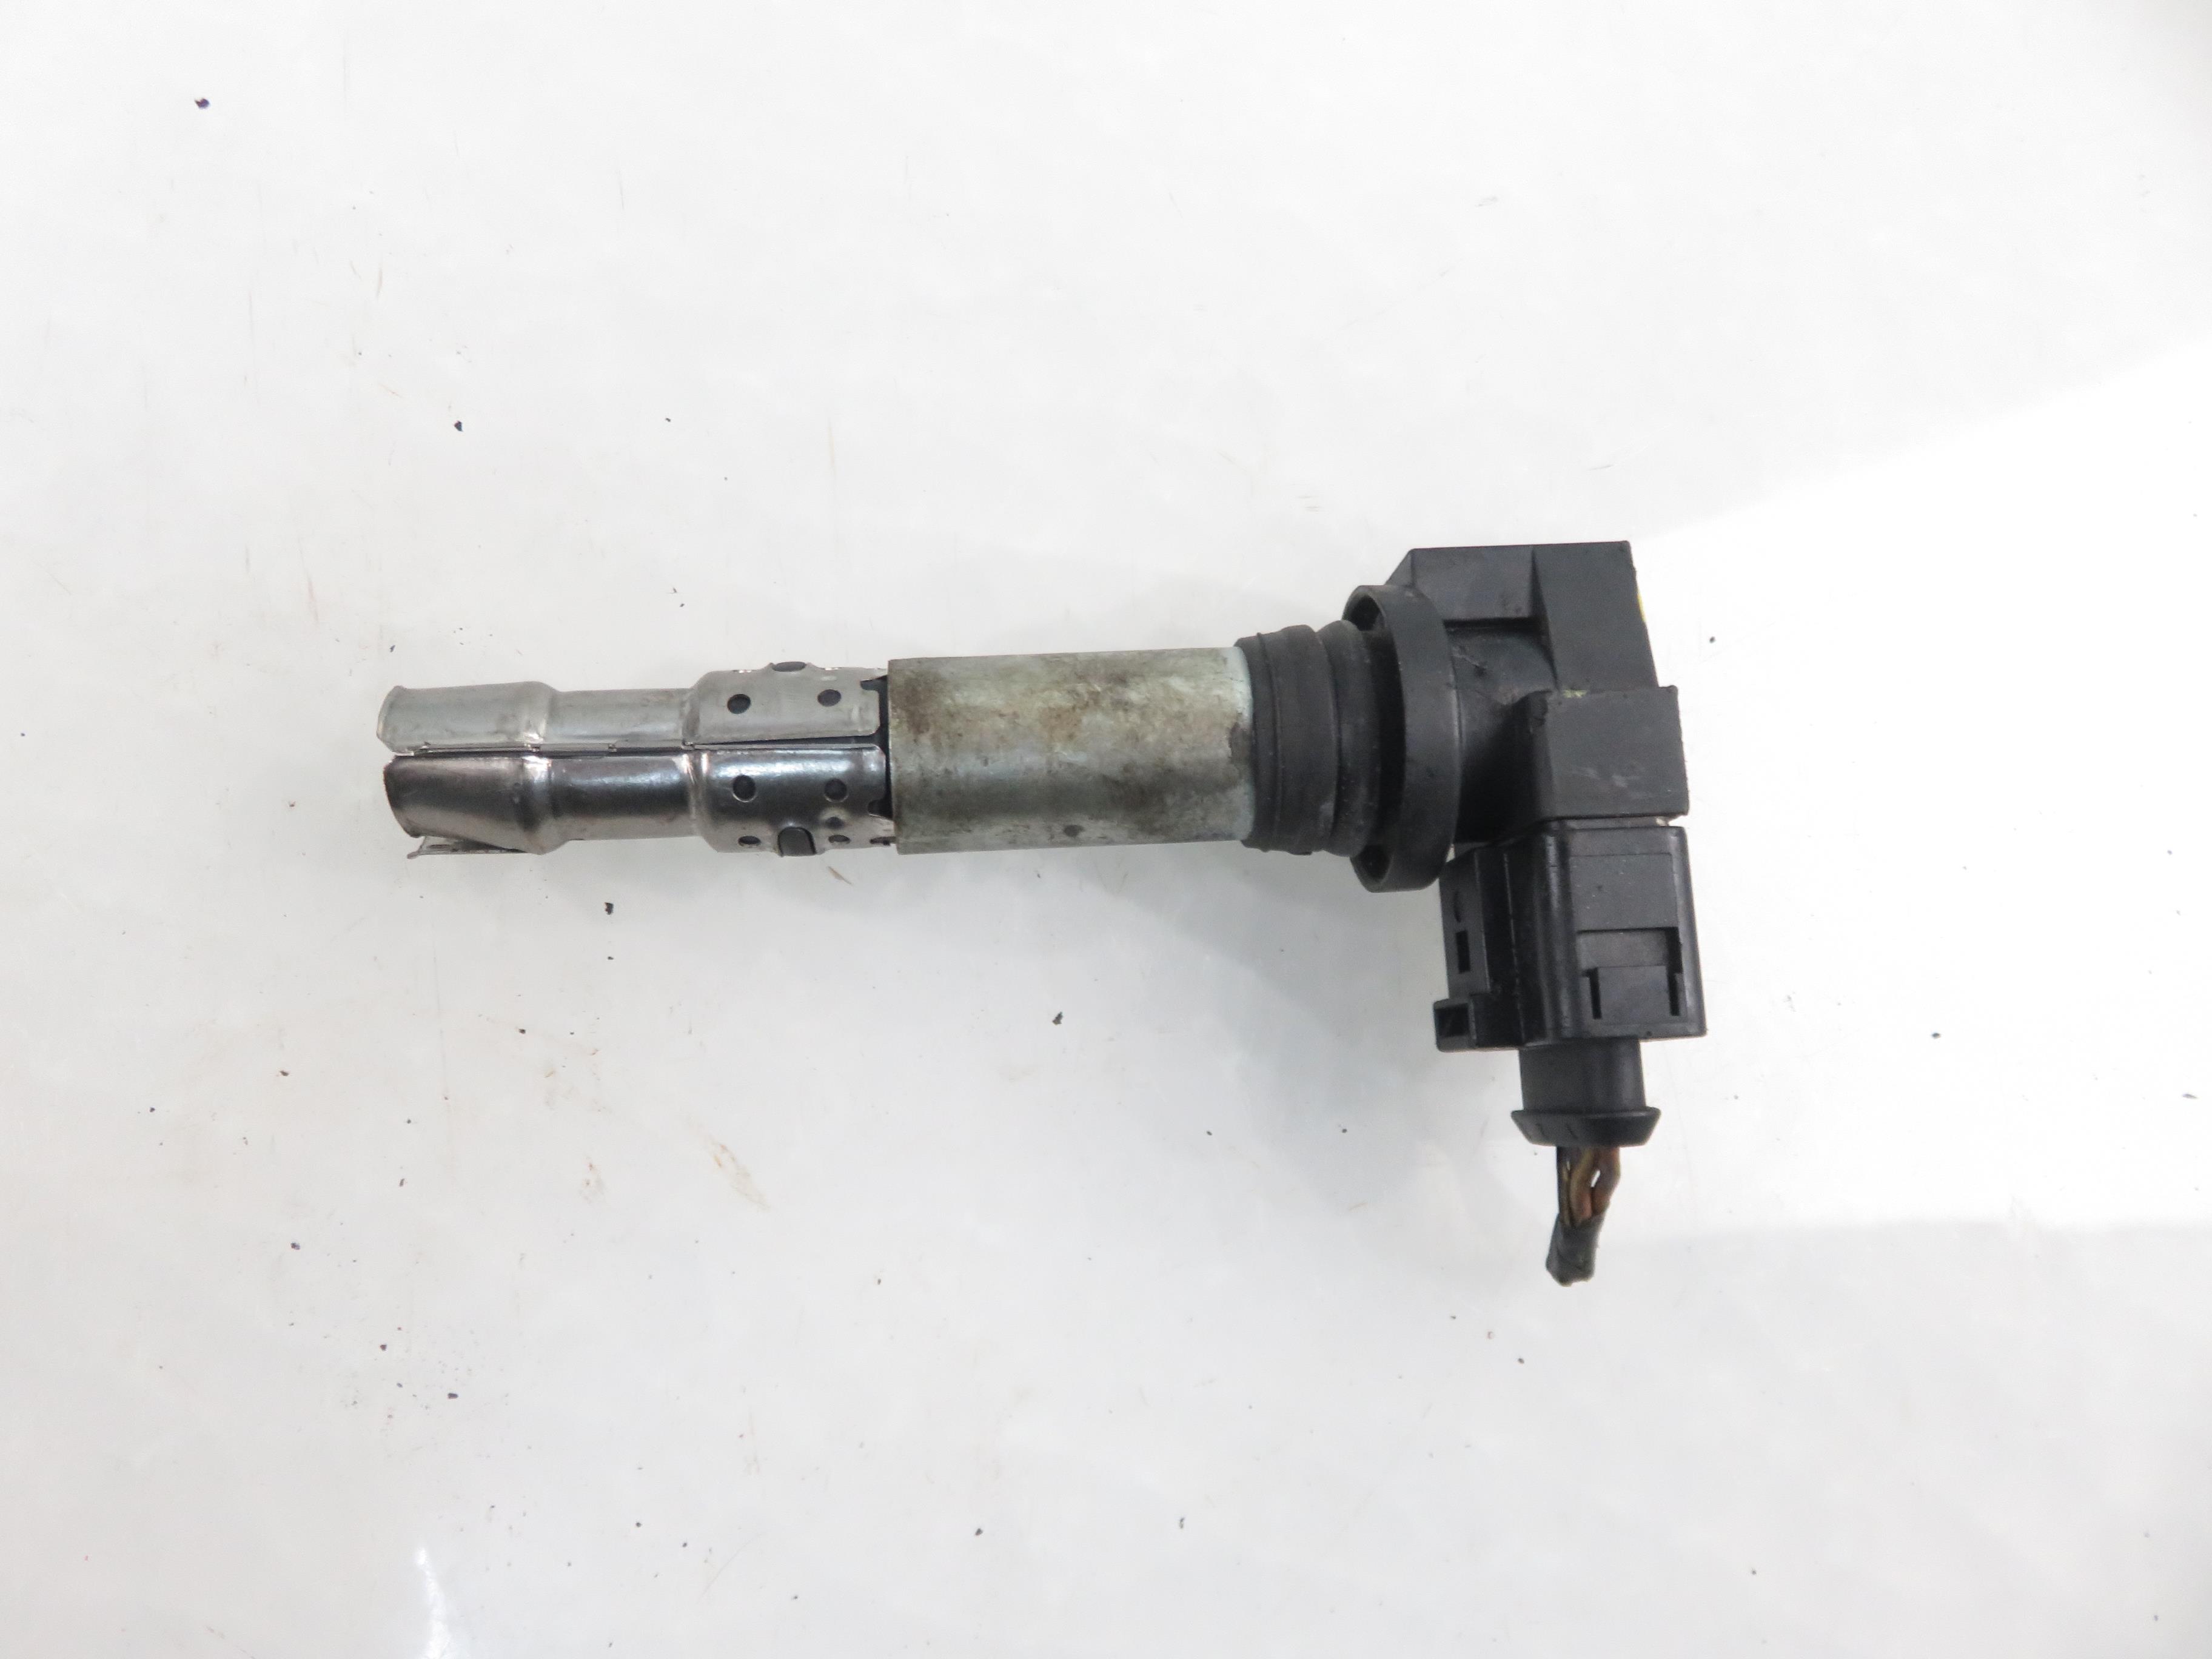 SEAT Ibiza 3 generation (2002-2008) High Voltage Ignition Coil 036905715A 22660454